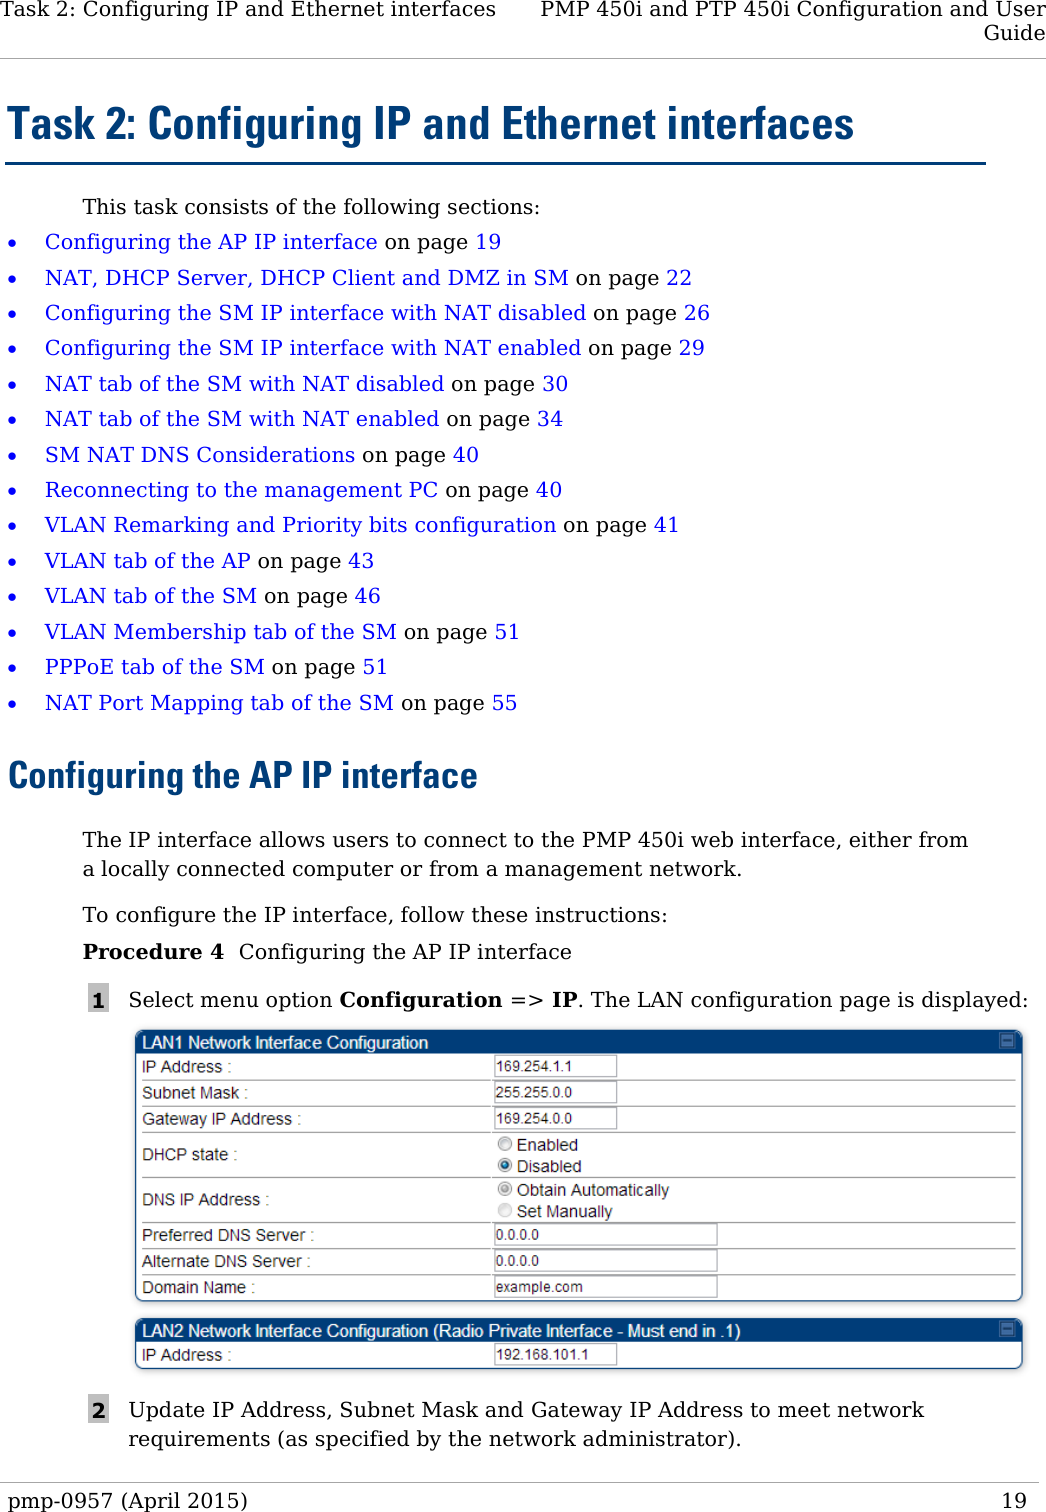 Task 2: Configuring IP and Ethernet interfaces PMP 450i and PTP 450i Configuration and User Guide  Task 2: Configuring IP and Ethernet interfaces This task consists of the following sections: • Configuring the AP IP interface on page 19 • NAT, DHCP Server, DHCP Client and DMZ in SM on page 22 • Configuring the SM IP interface with NAT disabled on page 26 • Configuring the SM IP interface with NAT enabled on page 29 • NAT tab of the SM with NAT disabled on page 30 • NAT tab of the SM with NAT enabled on page 34 • SM NAT DNS Considerations on page 40 • Reconnecting to the management PC on page 40 • VLAN Remarking and Priority bits configuration on page 41 • VLAN tab of the AP on page 43  • VLAN tab of the SM on page 46 • VLAN Membership tab of the SM on page 51 • PPPoE tab of the SM on page 51 • NAT Port Mapping tab of the SM on page 55 Configuring the AP IP interface The IP interface allows users to connect to the PMP 450i web interface, either from a locally connected computer or from a management network.   To configure the IP interface, follow these instructions: Procedure 4  Configuring the AP IP interface 1  Select menu option Configuration =&gt; IP. The LAN configuration page is displayed:  2  Update IP Address, Subnet Mask and Gateway IP Address to meet network requirements (as specified by the network administrator). pmp-0957 (April 2015)   19  